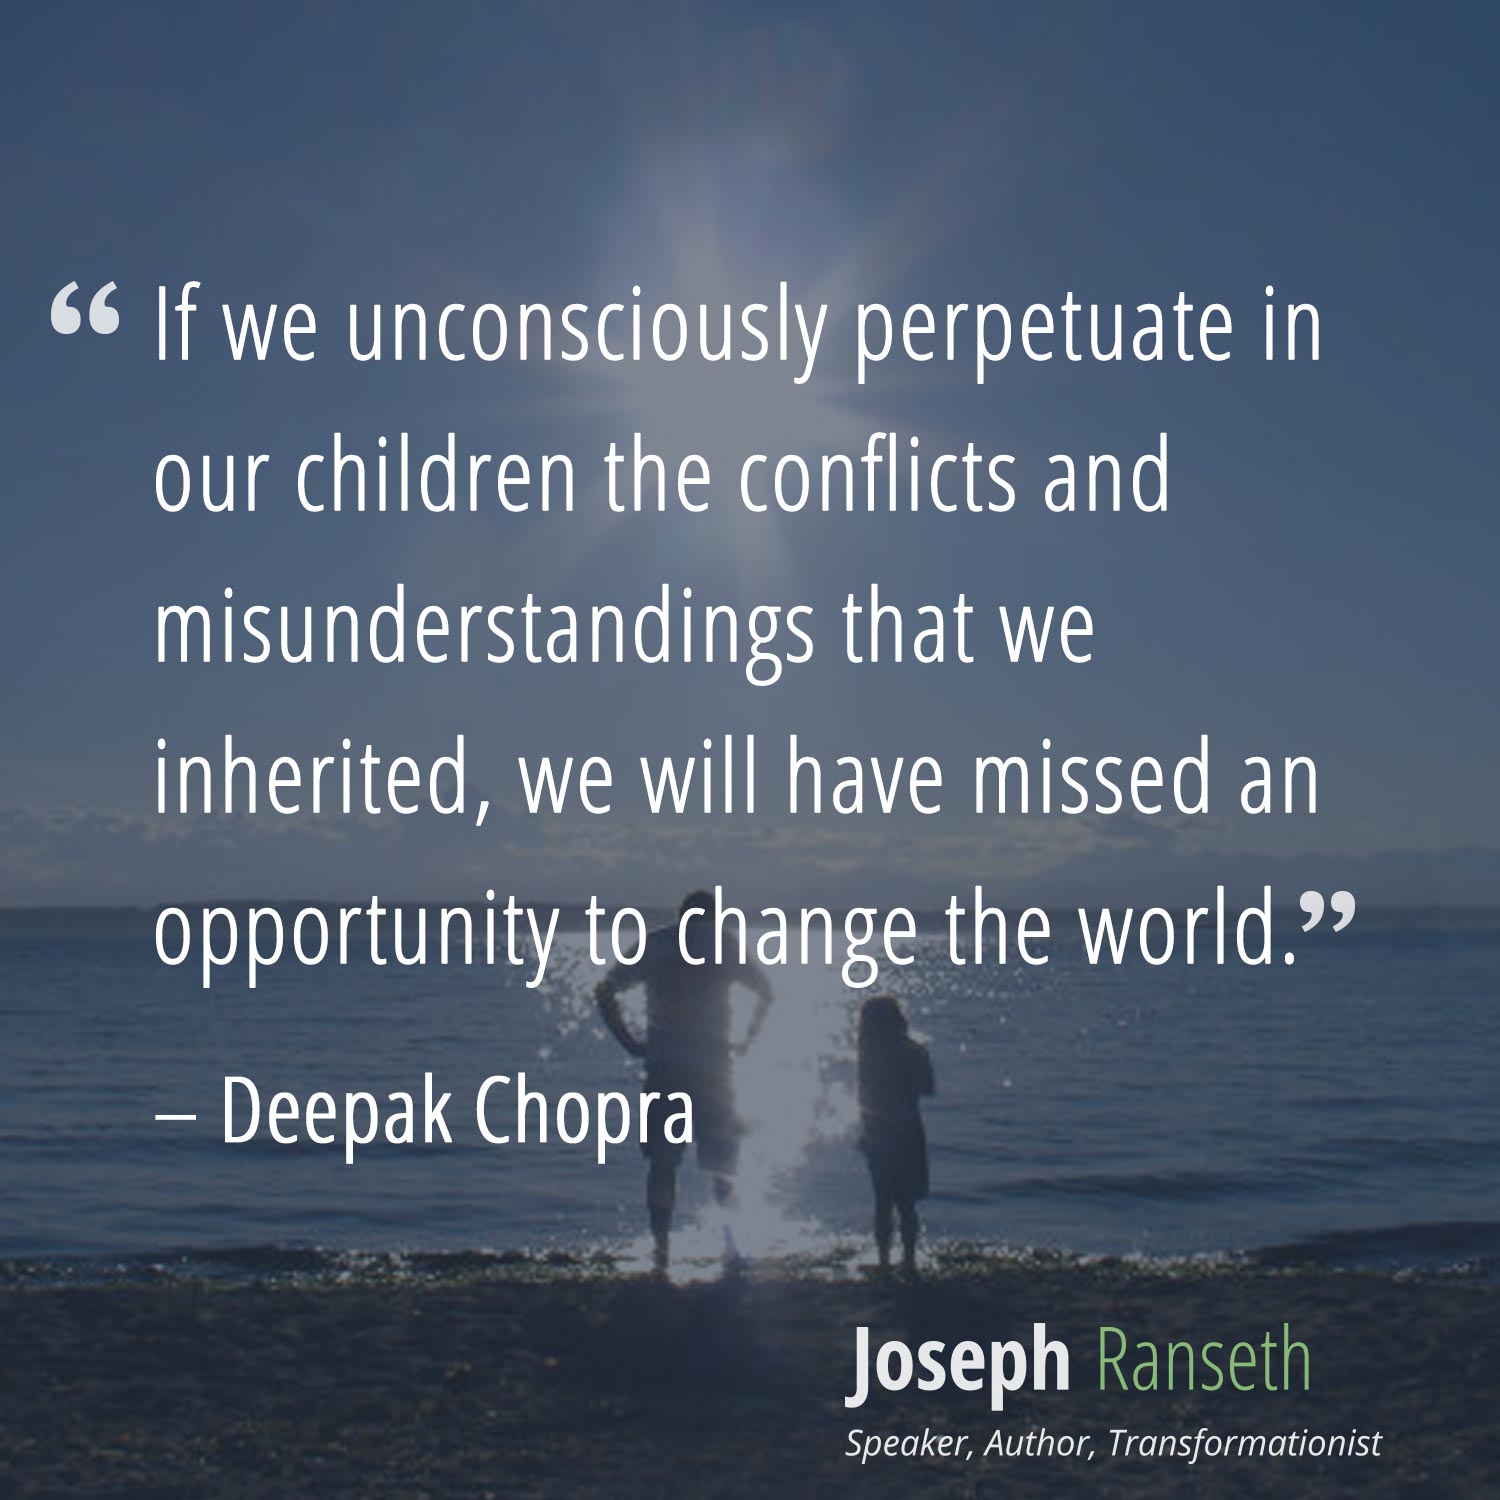 "If we unconsciously perpetuate in our children the conflicts and misunderstandings that we inherited, we will have missed an opportunity to change the world." - Deepak Chopra #quote #inspiration